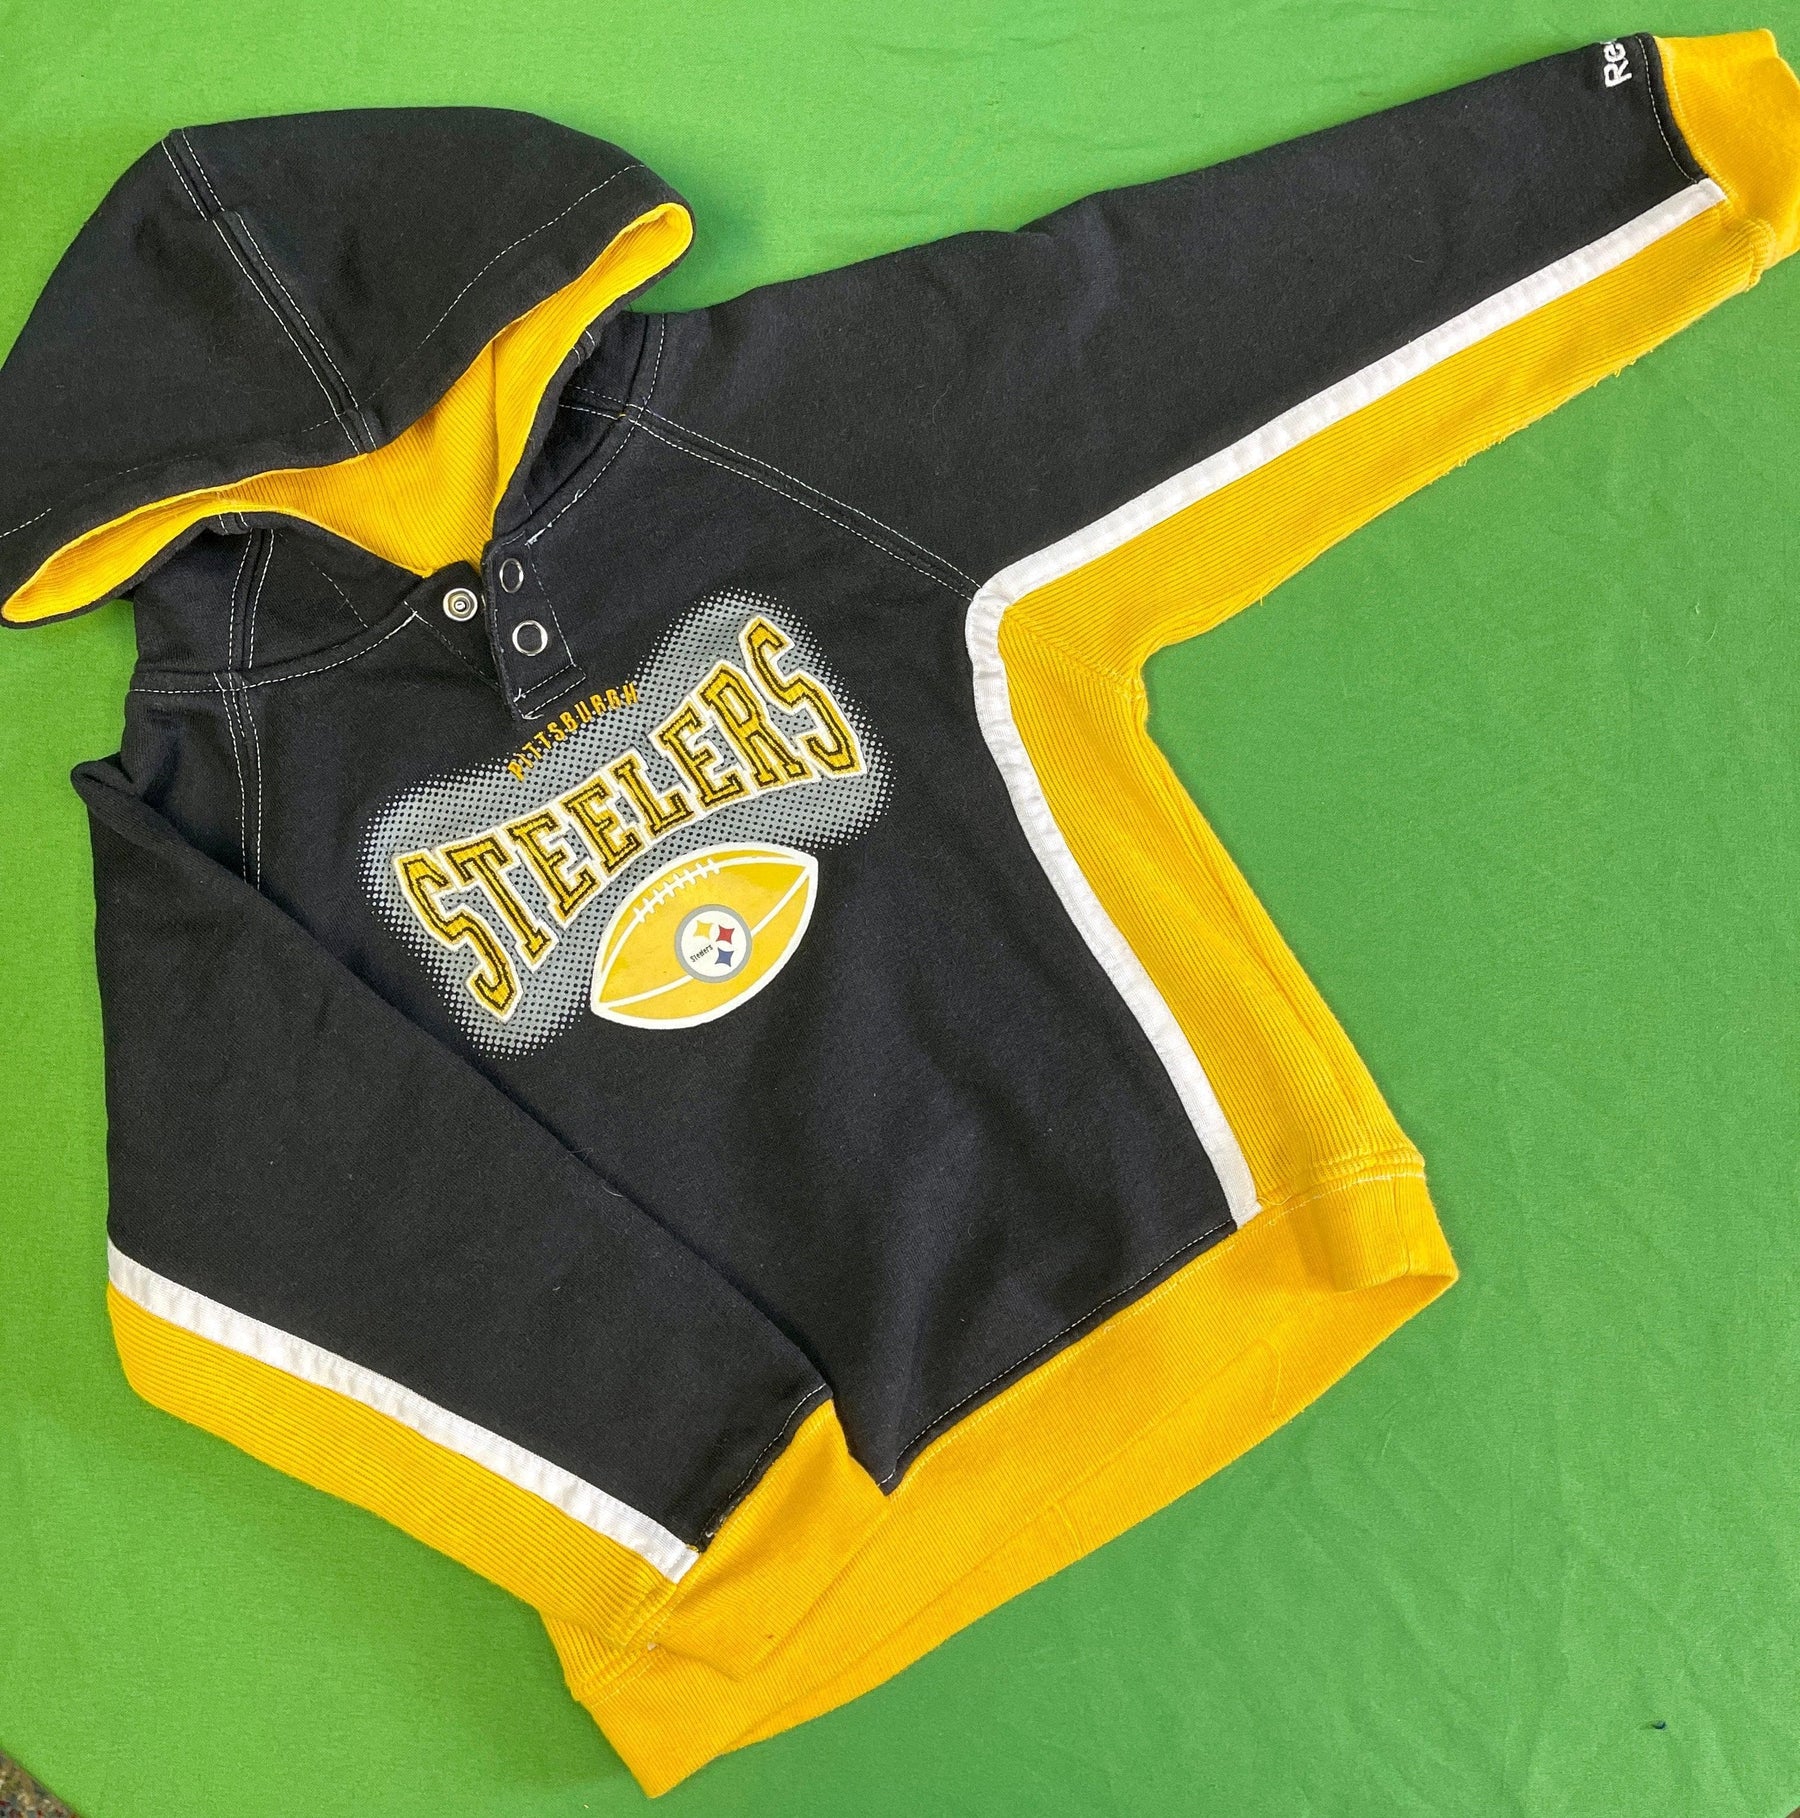 NFL Pittsburgh Steelers Reebok Stitched Pullover Hoodie Toddler 4T